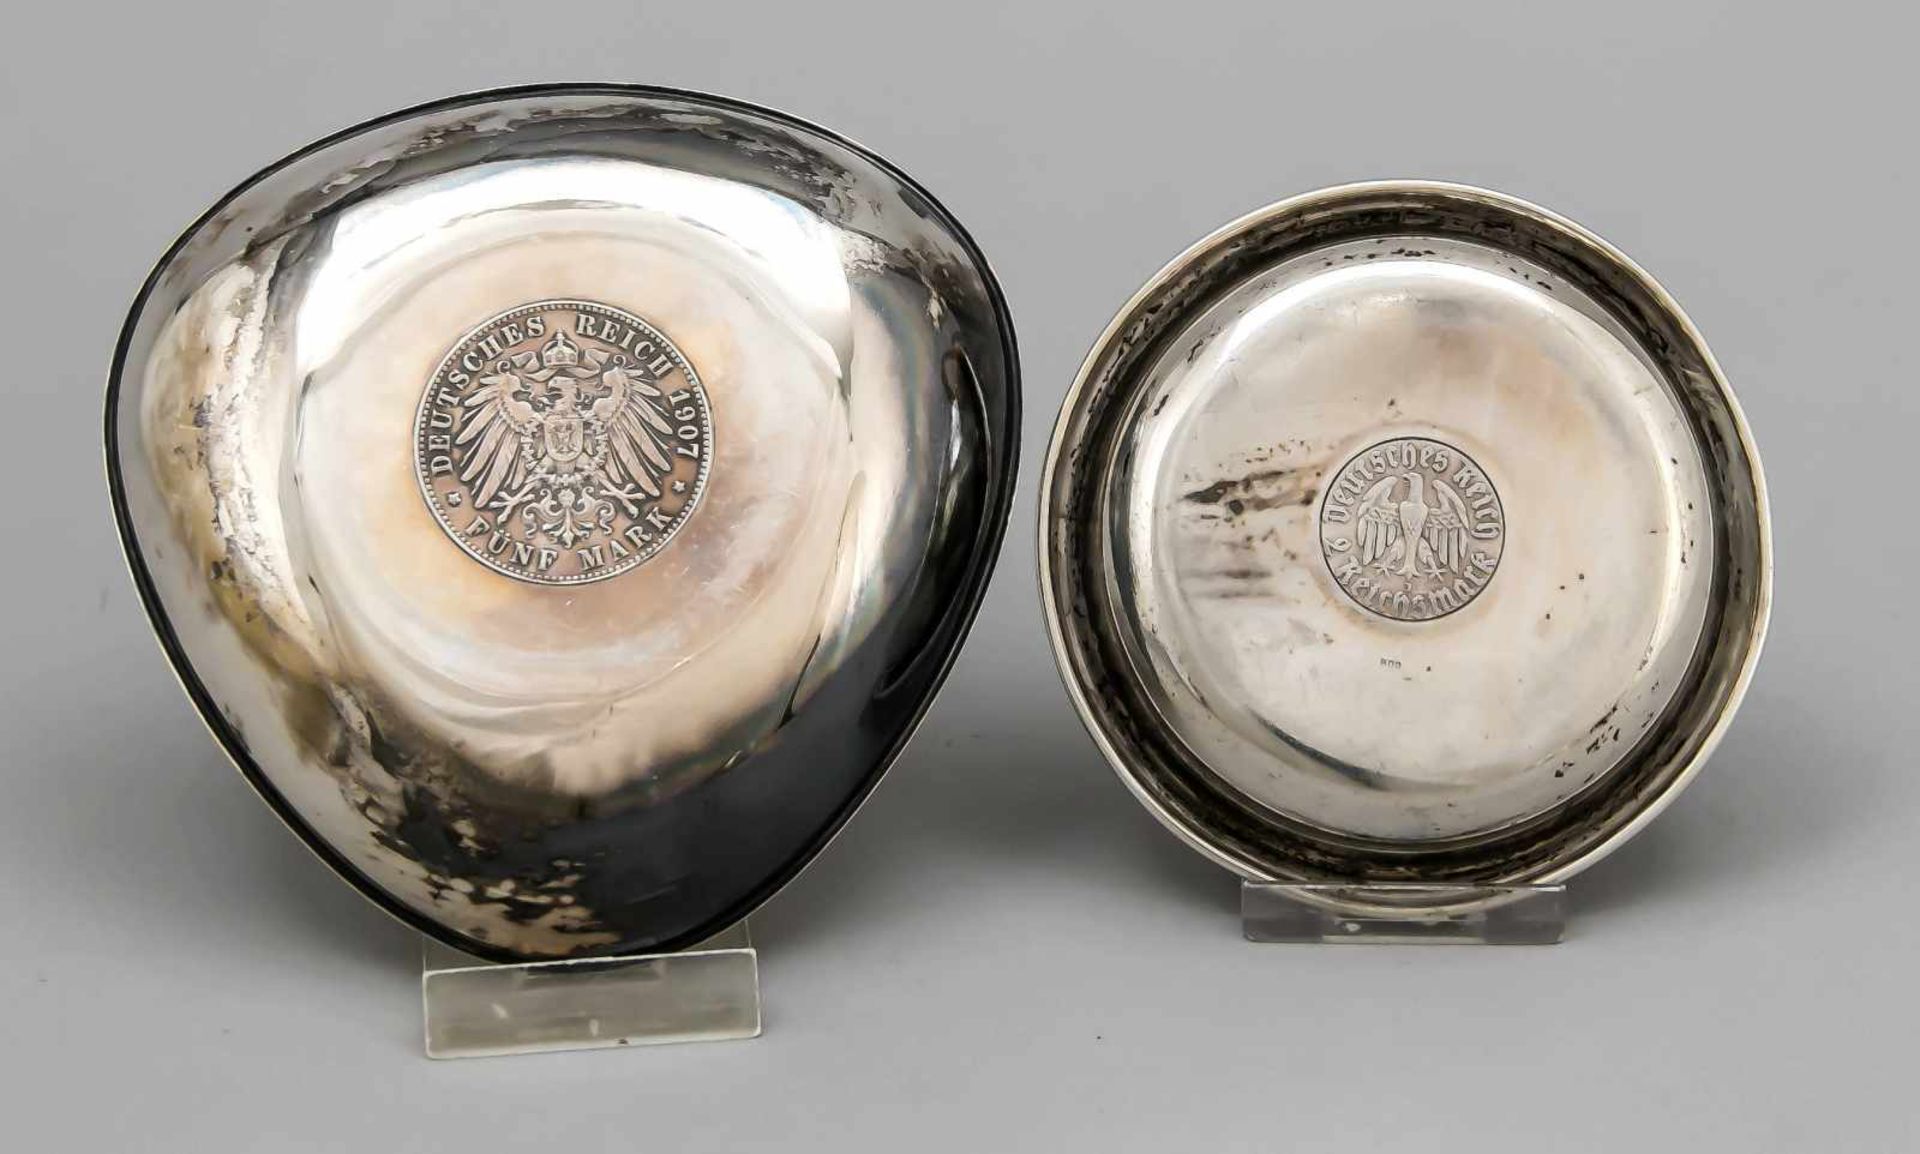 Two coin bowls, German, 1st half of the 20th century, different manufacturers, silver800/000 or - Bild 2 aus 2